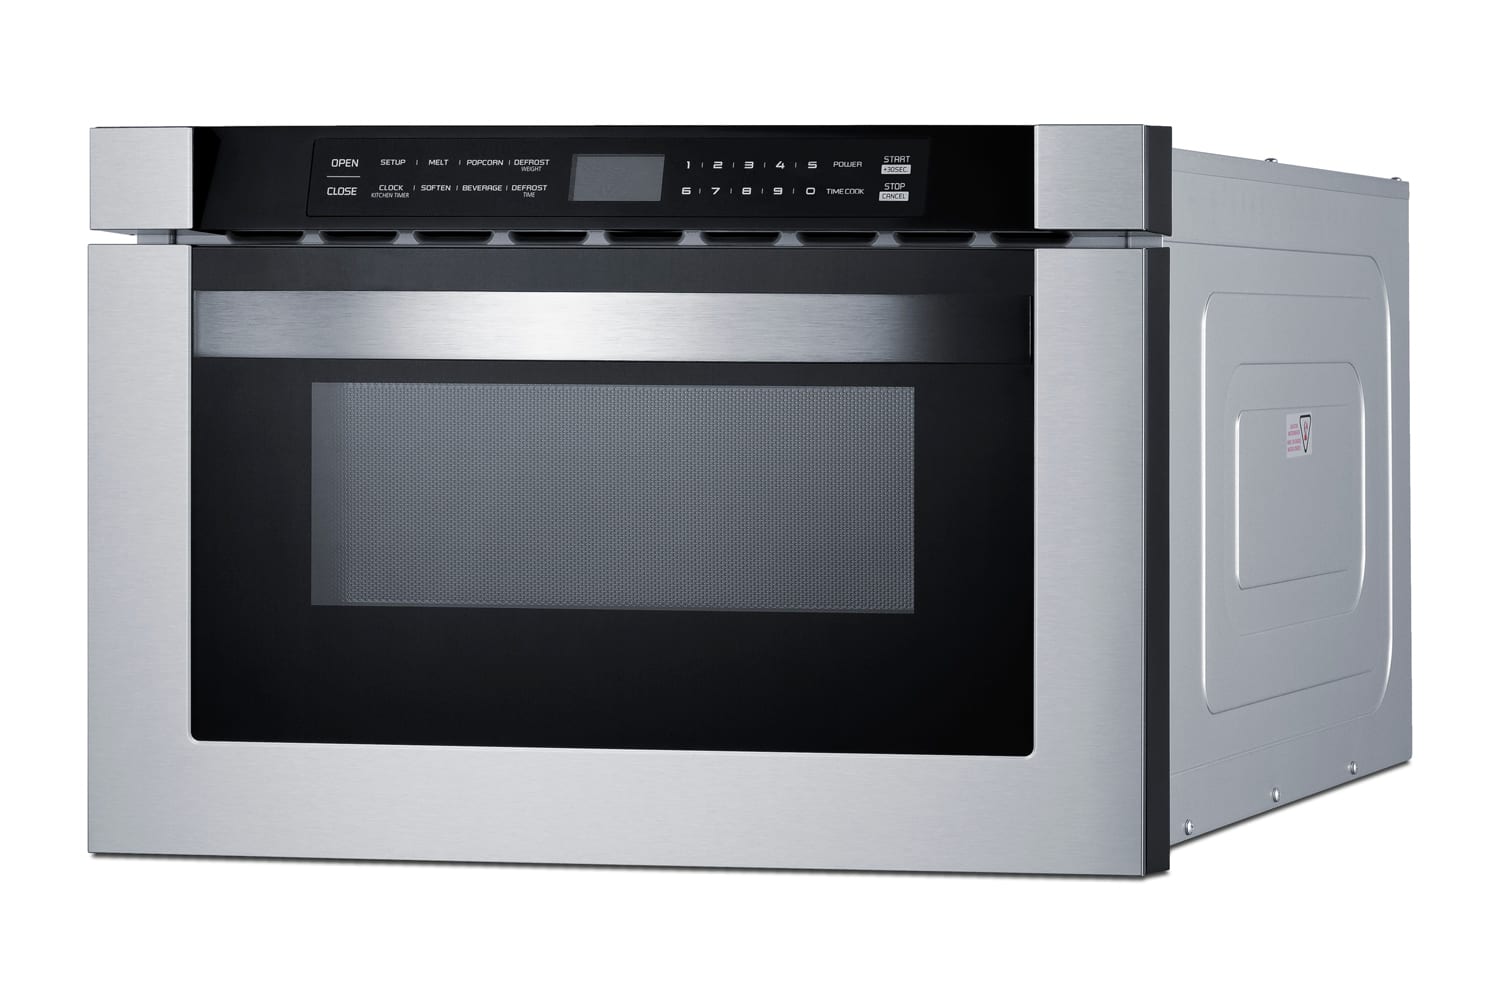 Summit 24 Wide 115V Electric Wall Oven